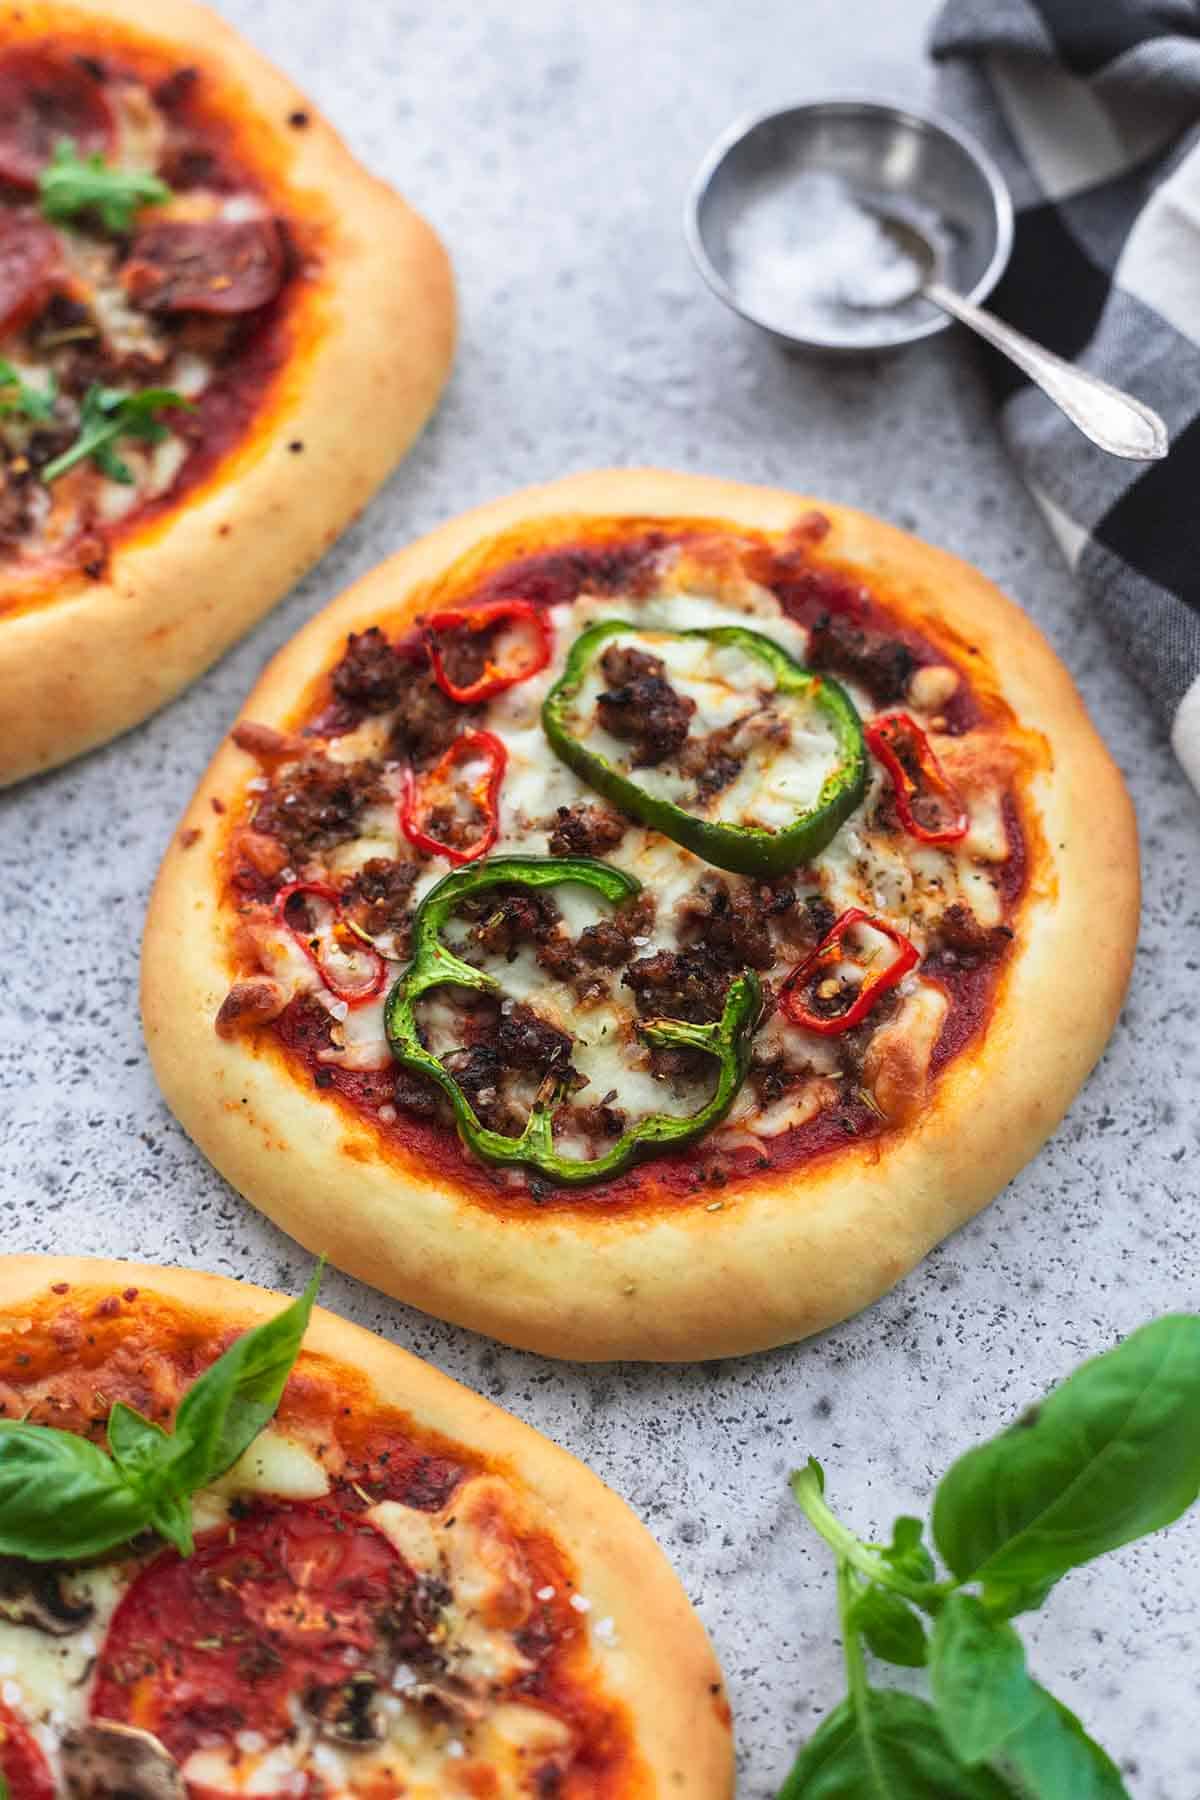 a personal pizza with more personal pizzas on the side.